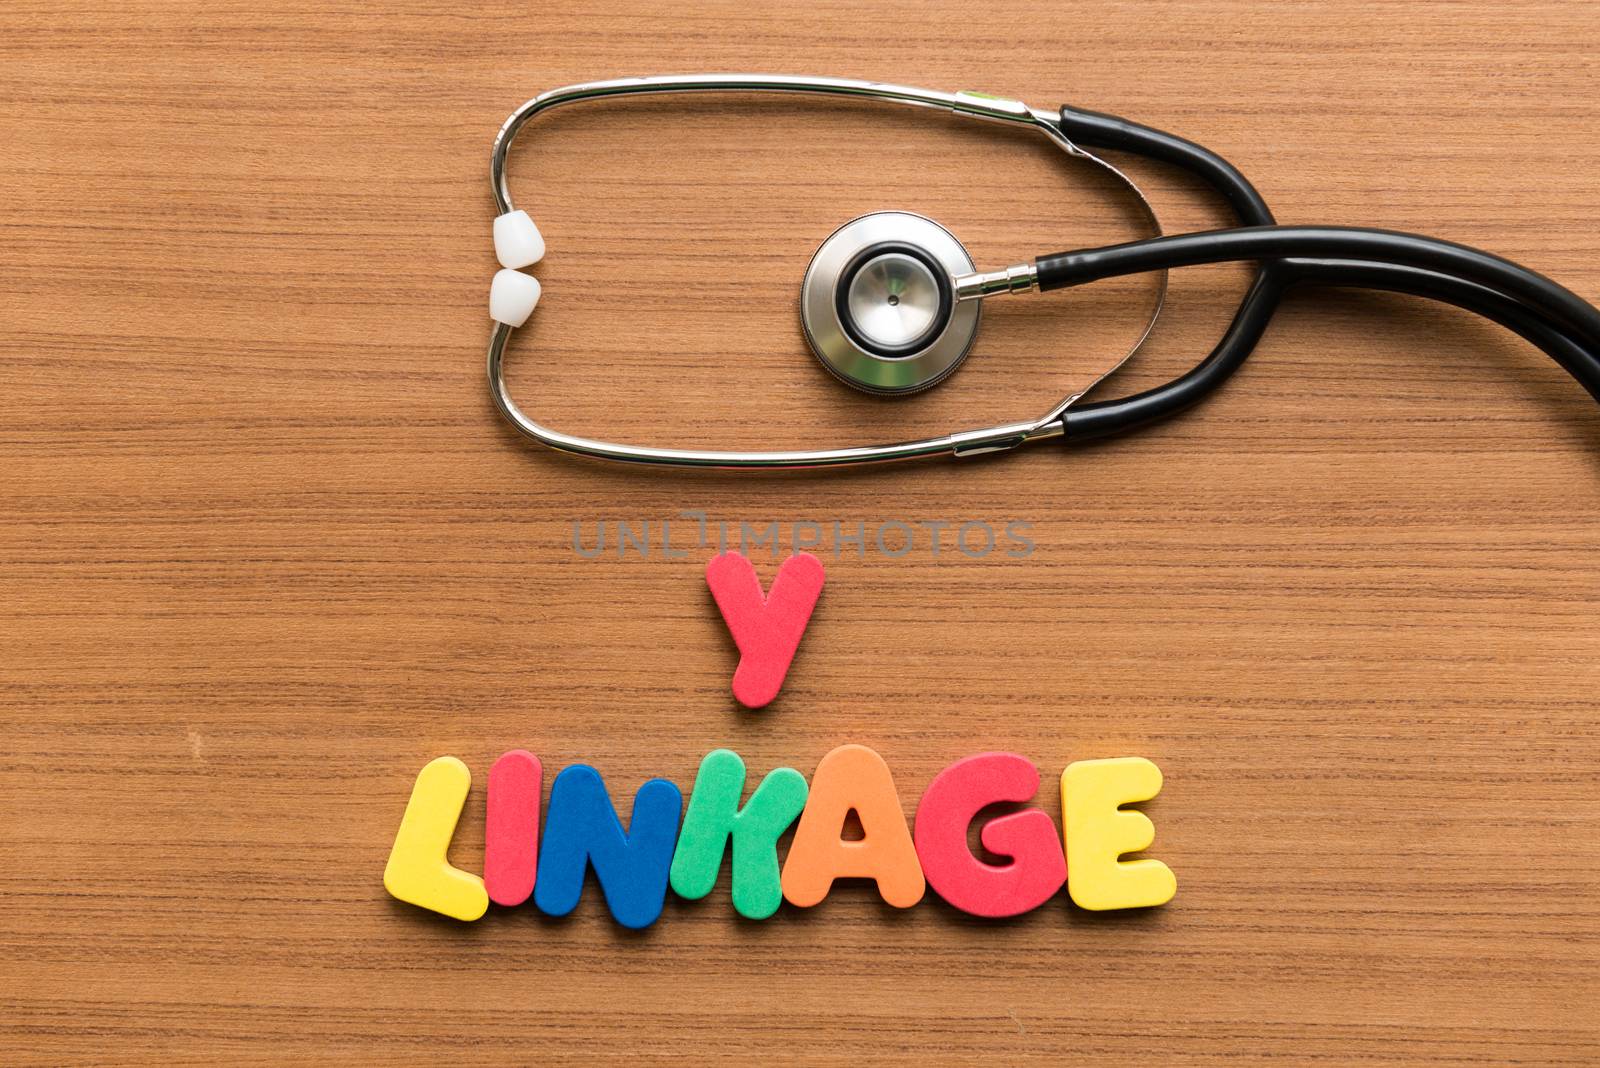 y linkage colorful word with stethoscope on wooden background